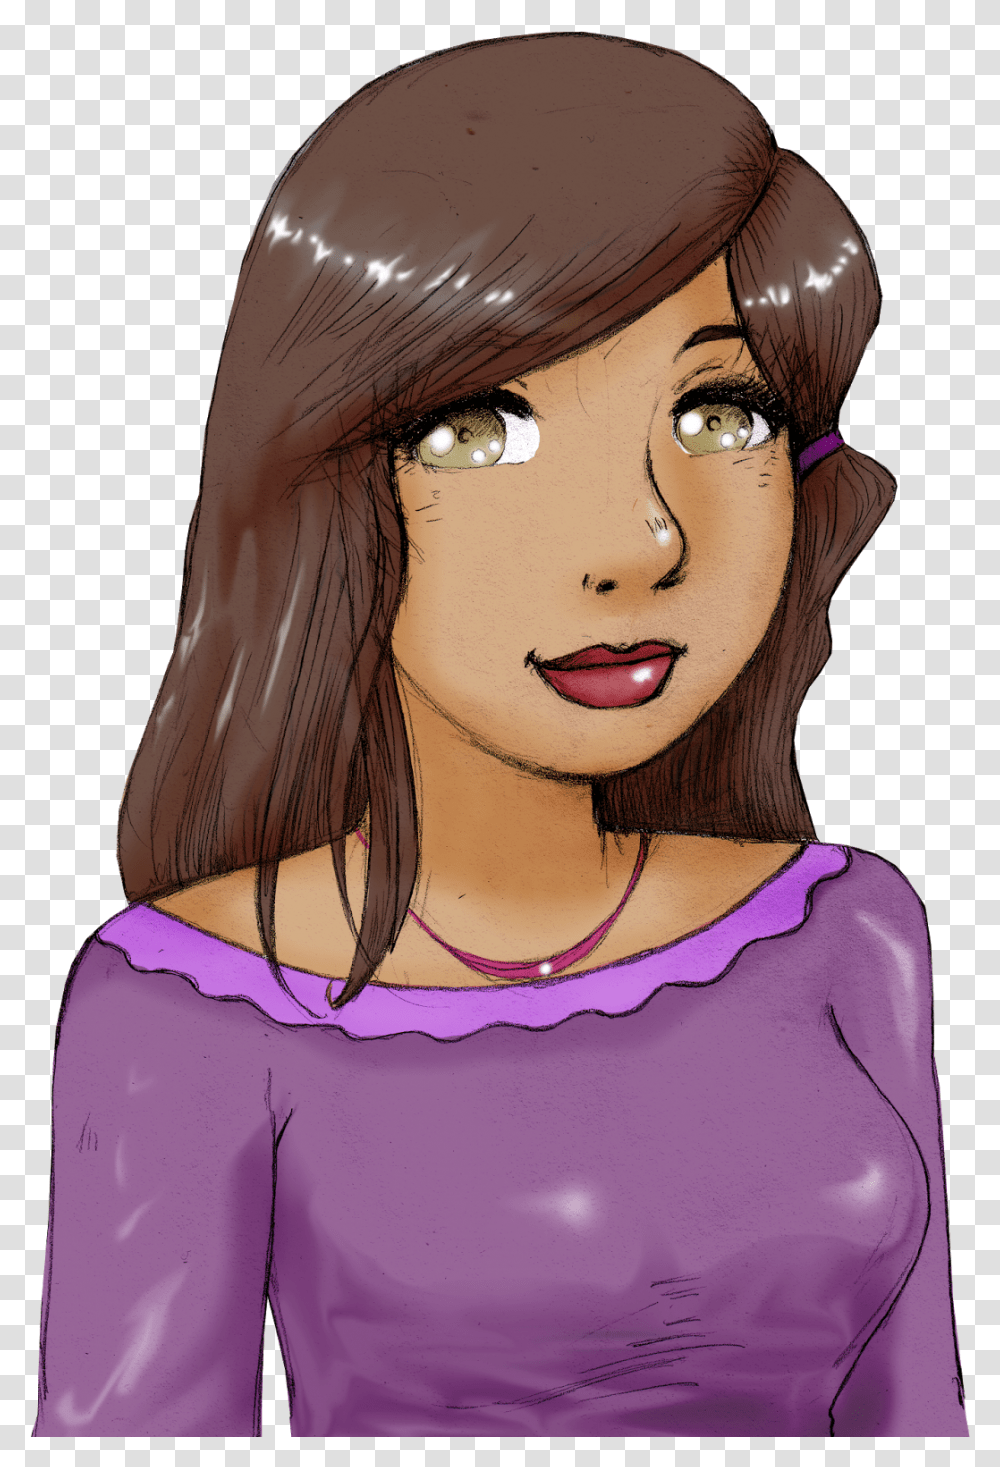 Again With More Portraits Of Girls Cartoon, Person, Head, Face Transparent Png